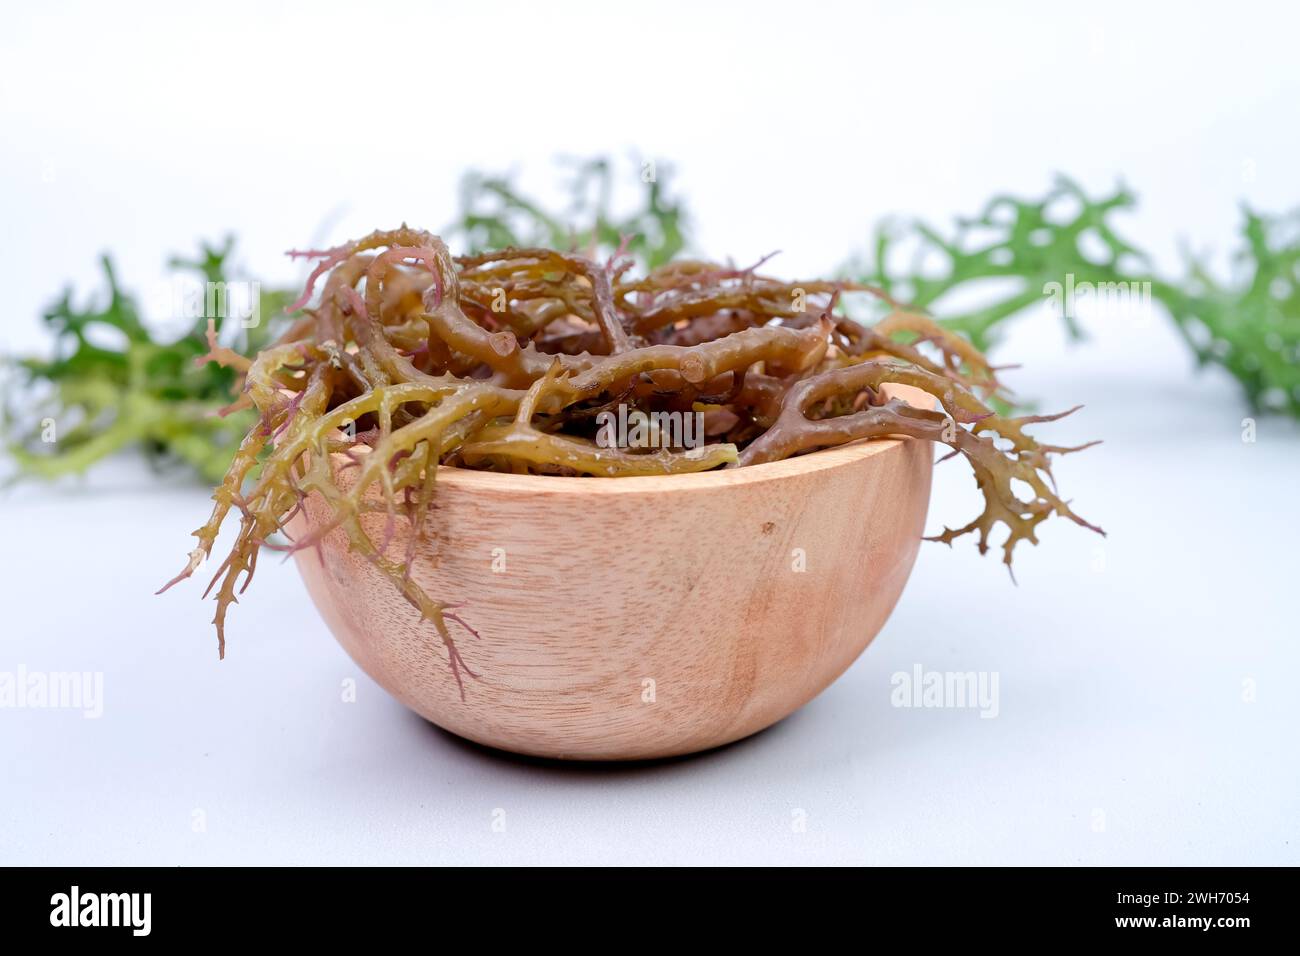 Fresh Graciillaria Spp seaweed in wooden bowl isolated on white background Stock Photo